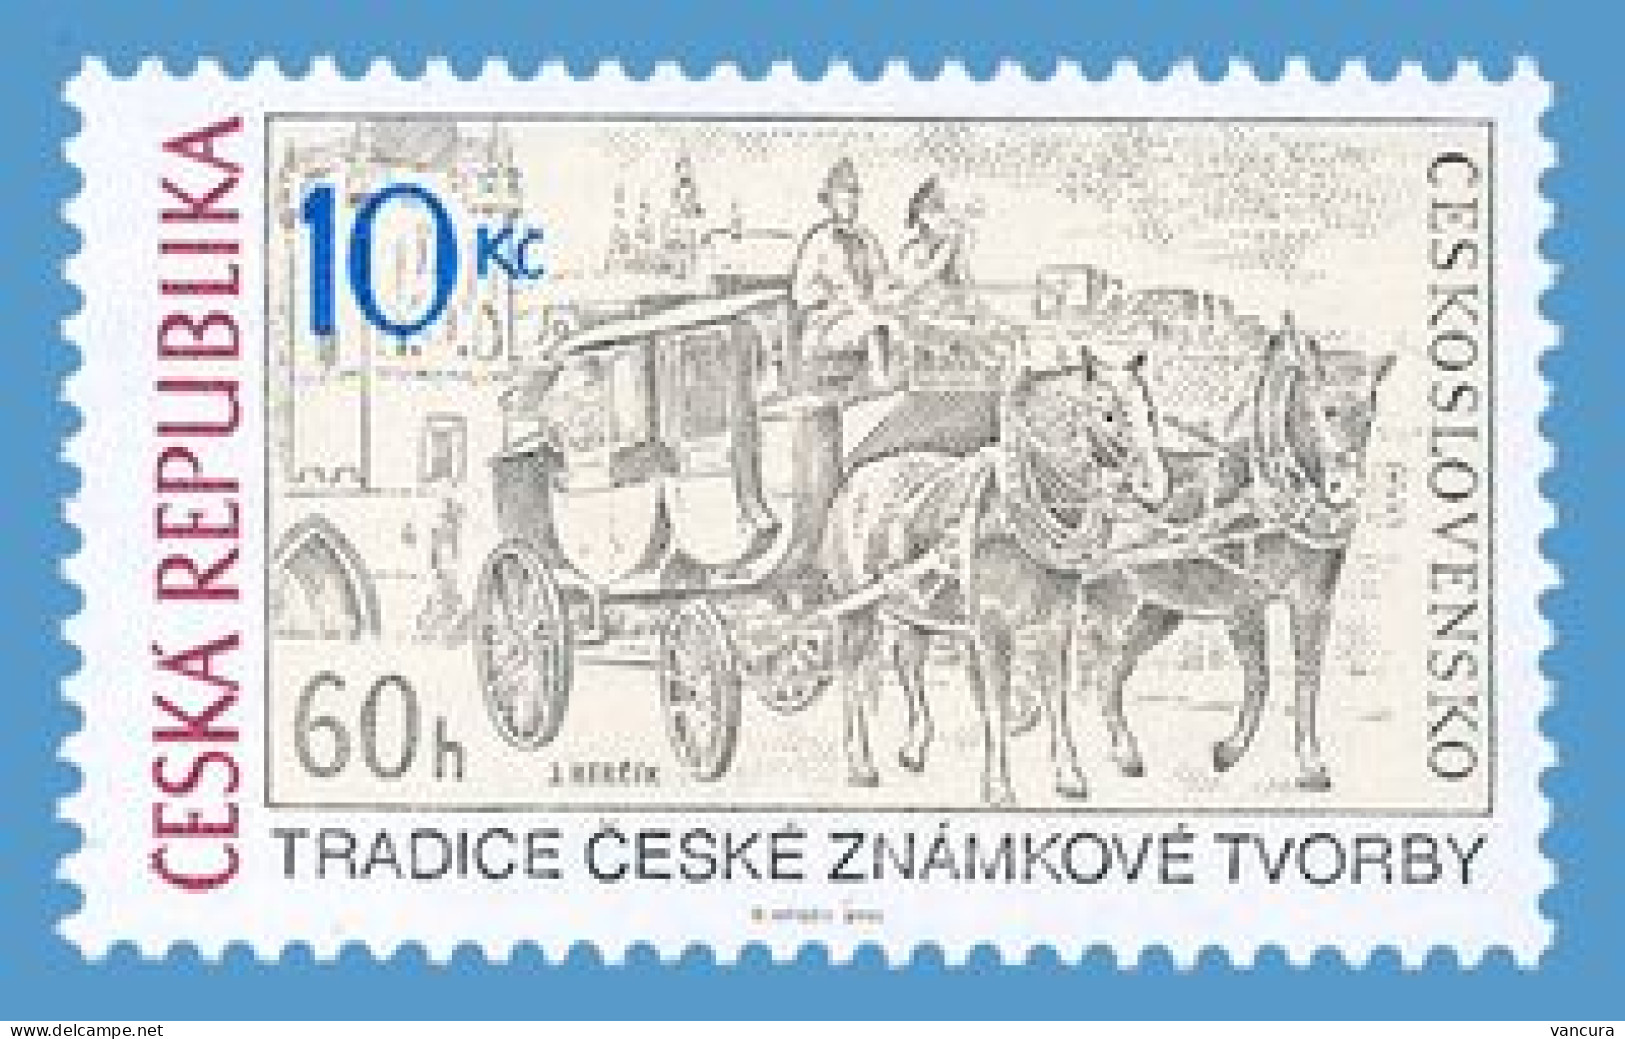 ** 667 Czech Republic Traditions Of The Stamp Design - Hercik's Coach On The Charles Bridge  2011 - Diligences